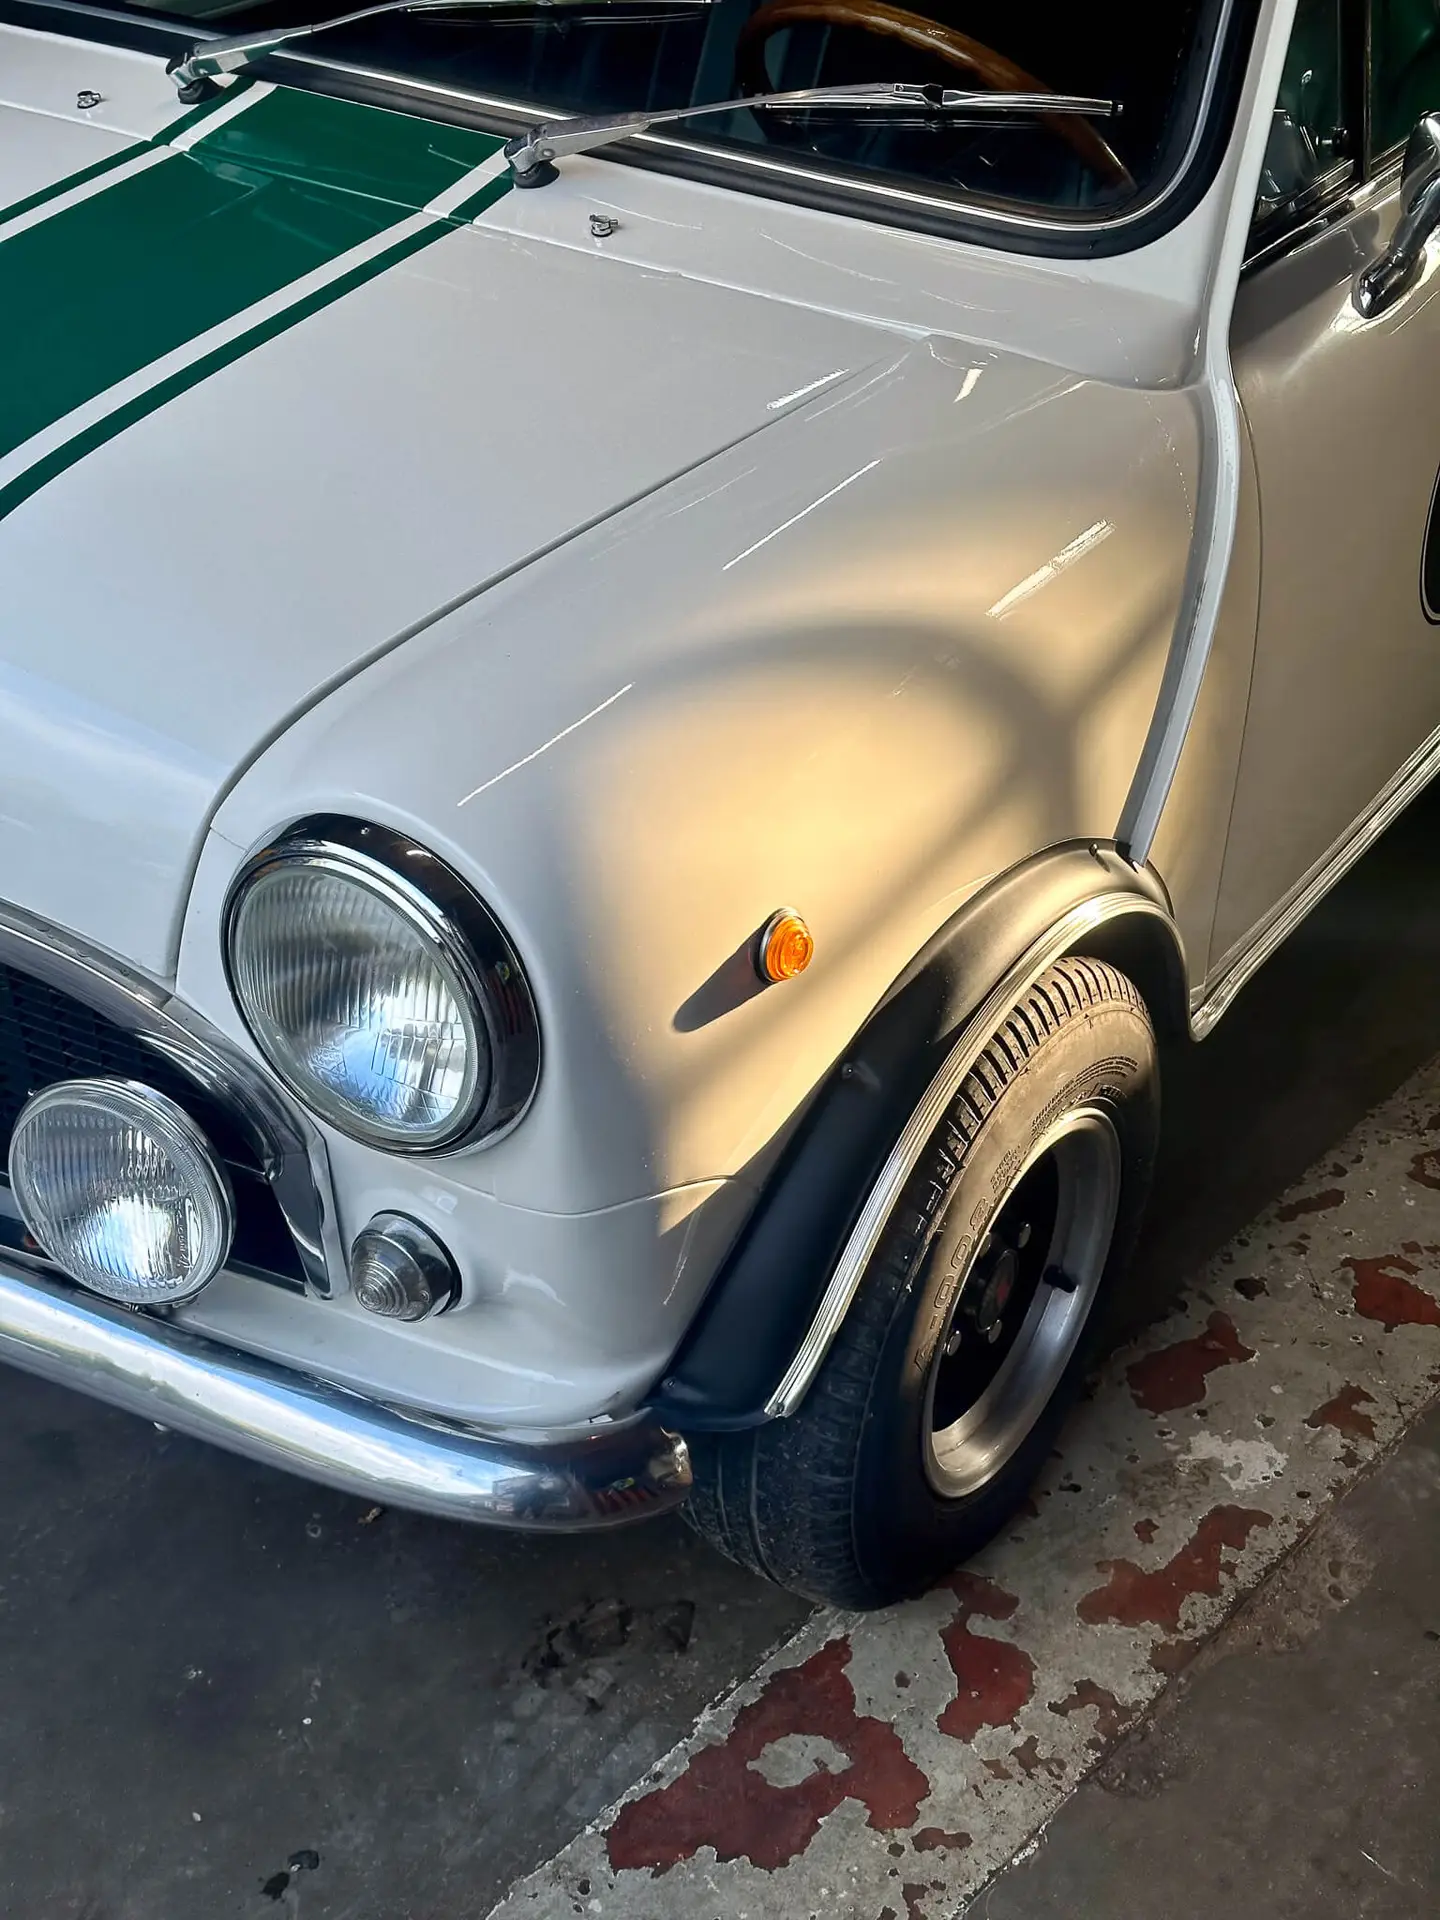 innocenti mini 1001 with green striping over the car and sunrays on the white paint